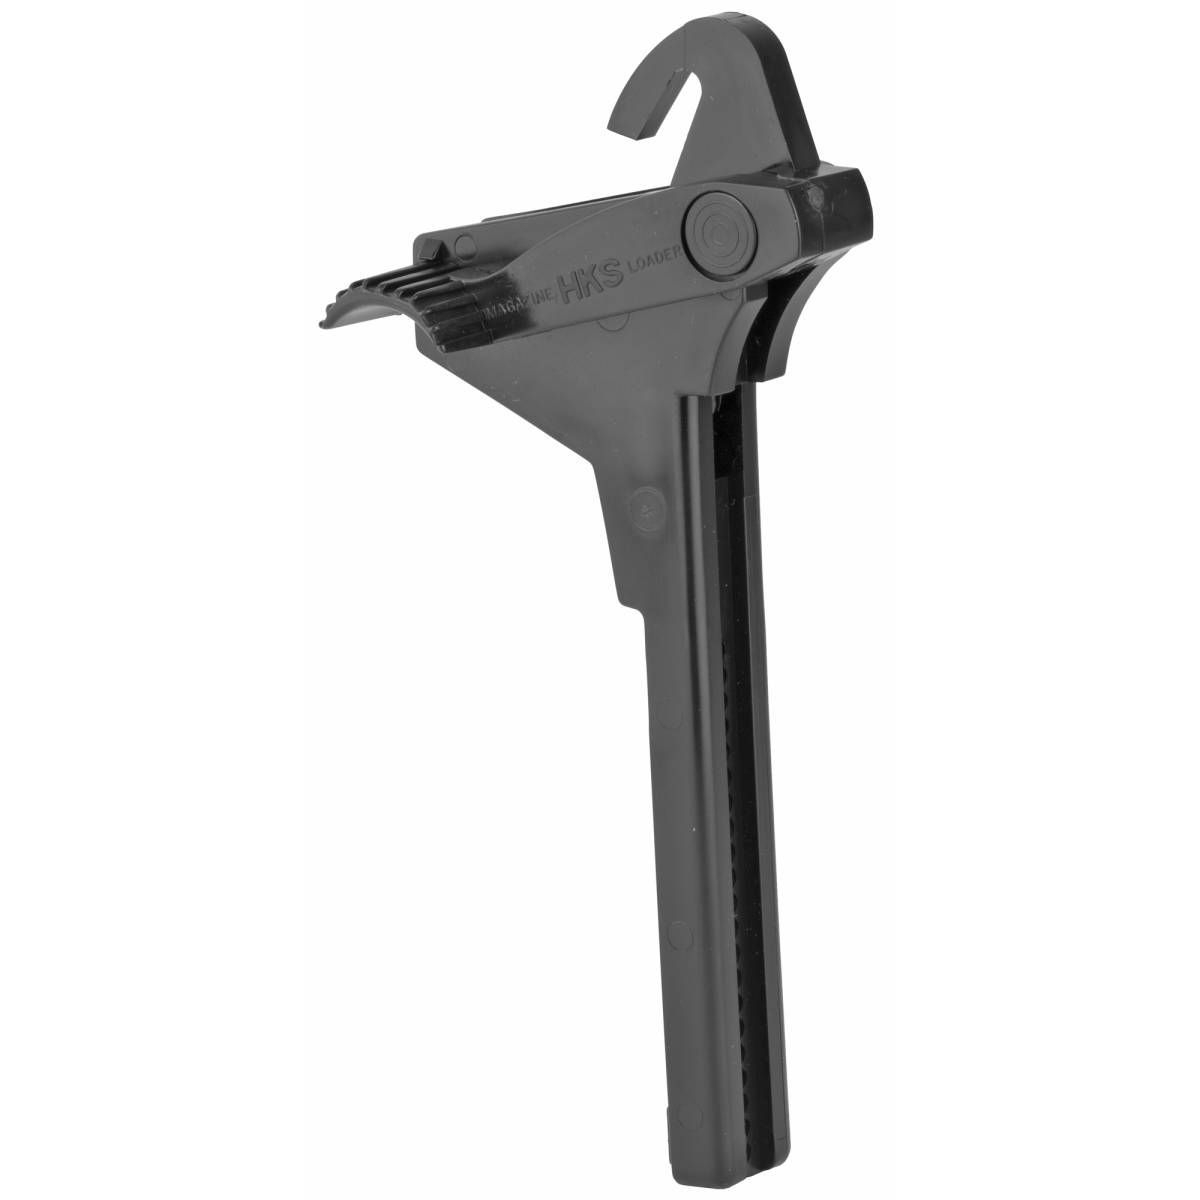 HKS 451 Single Stack Mag Loader Adjustable Style made of Plastic with...-img-1